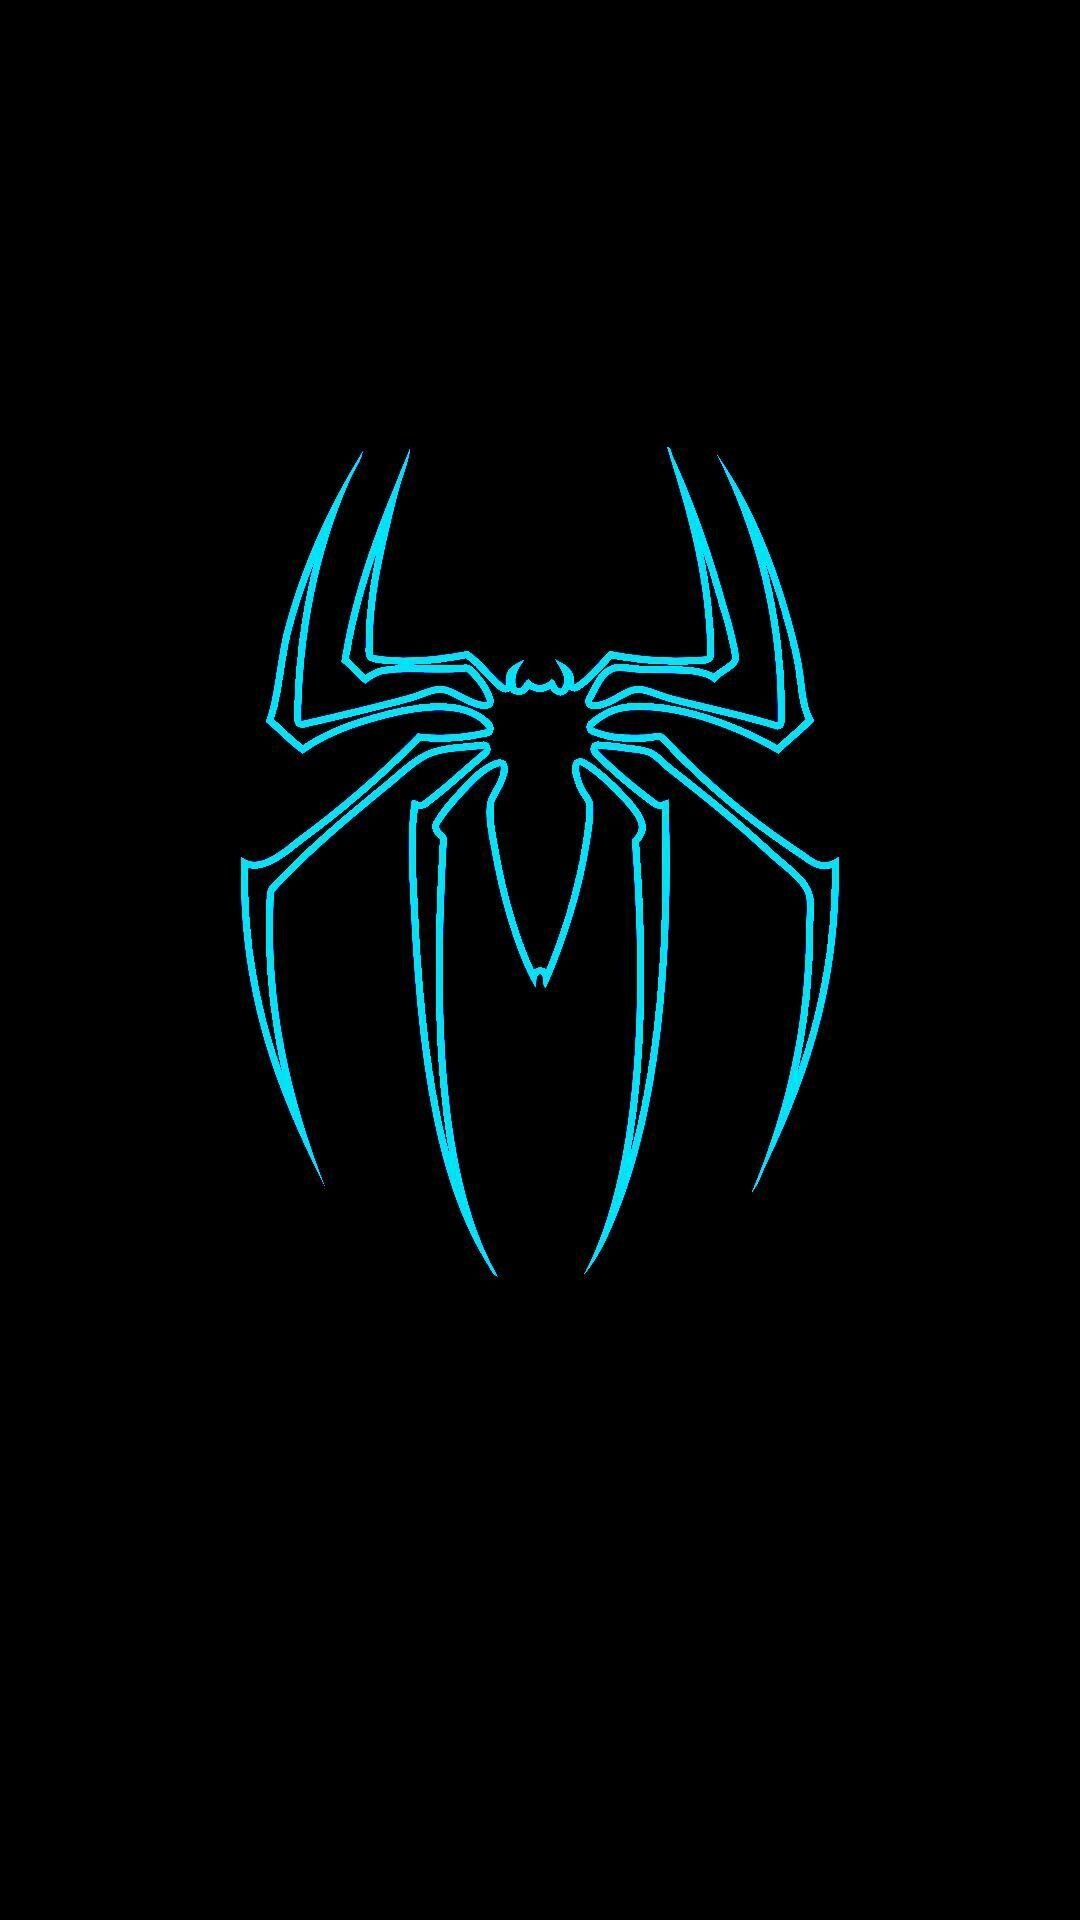 Spiderman Logo Wallpaper HD For iPhone